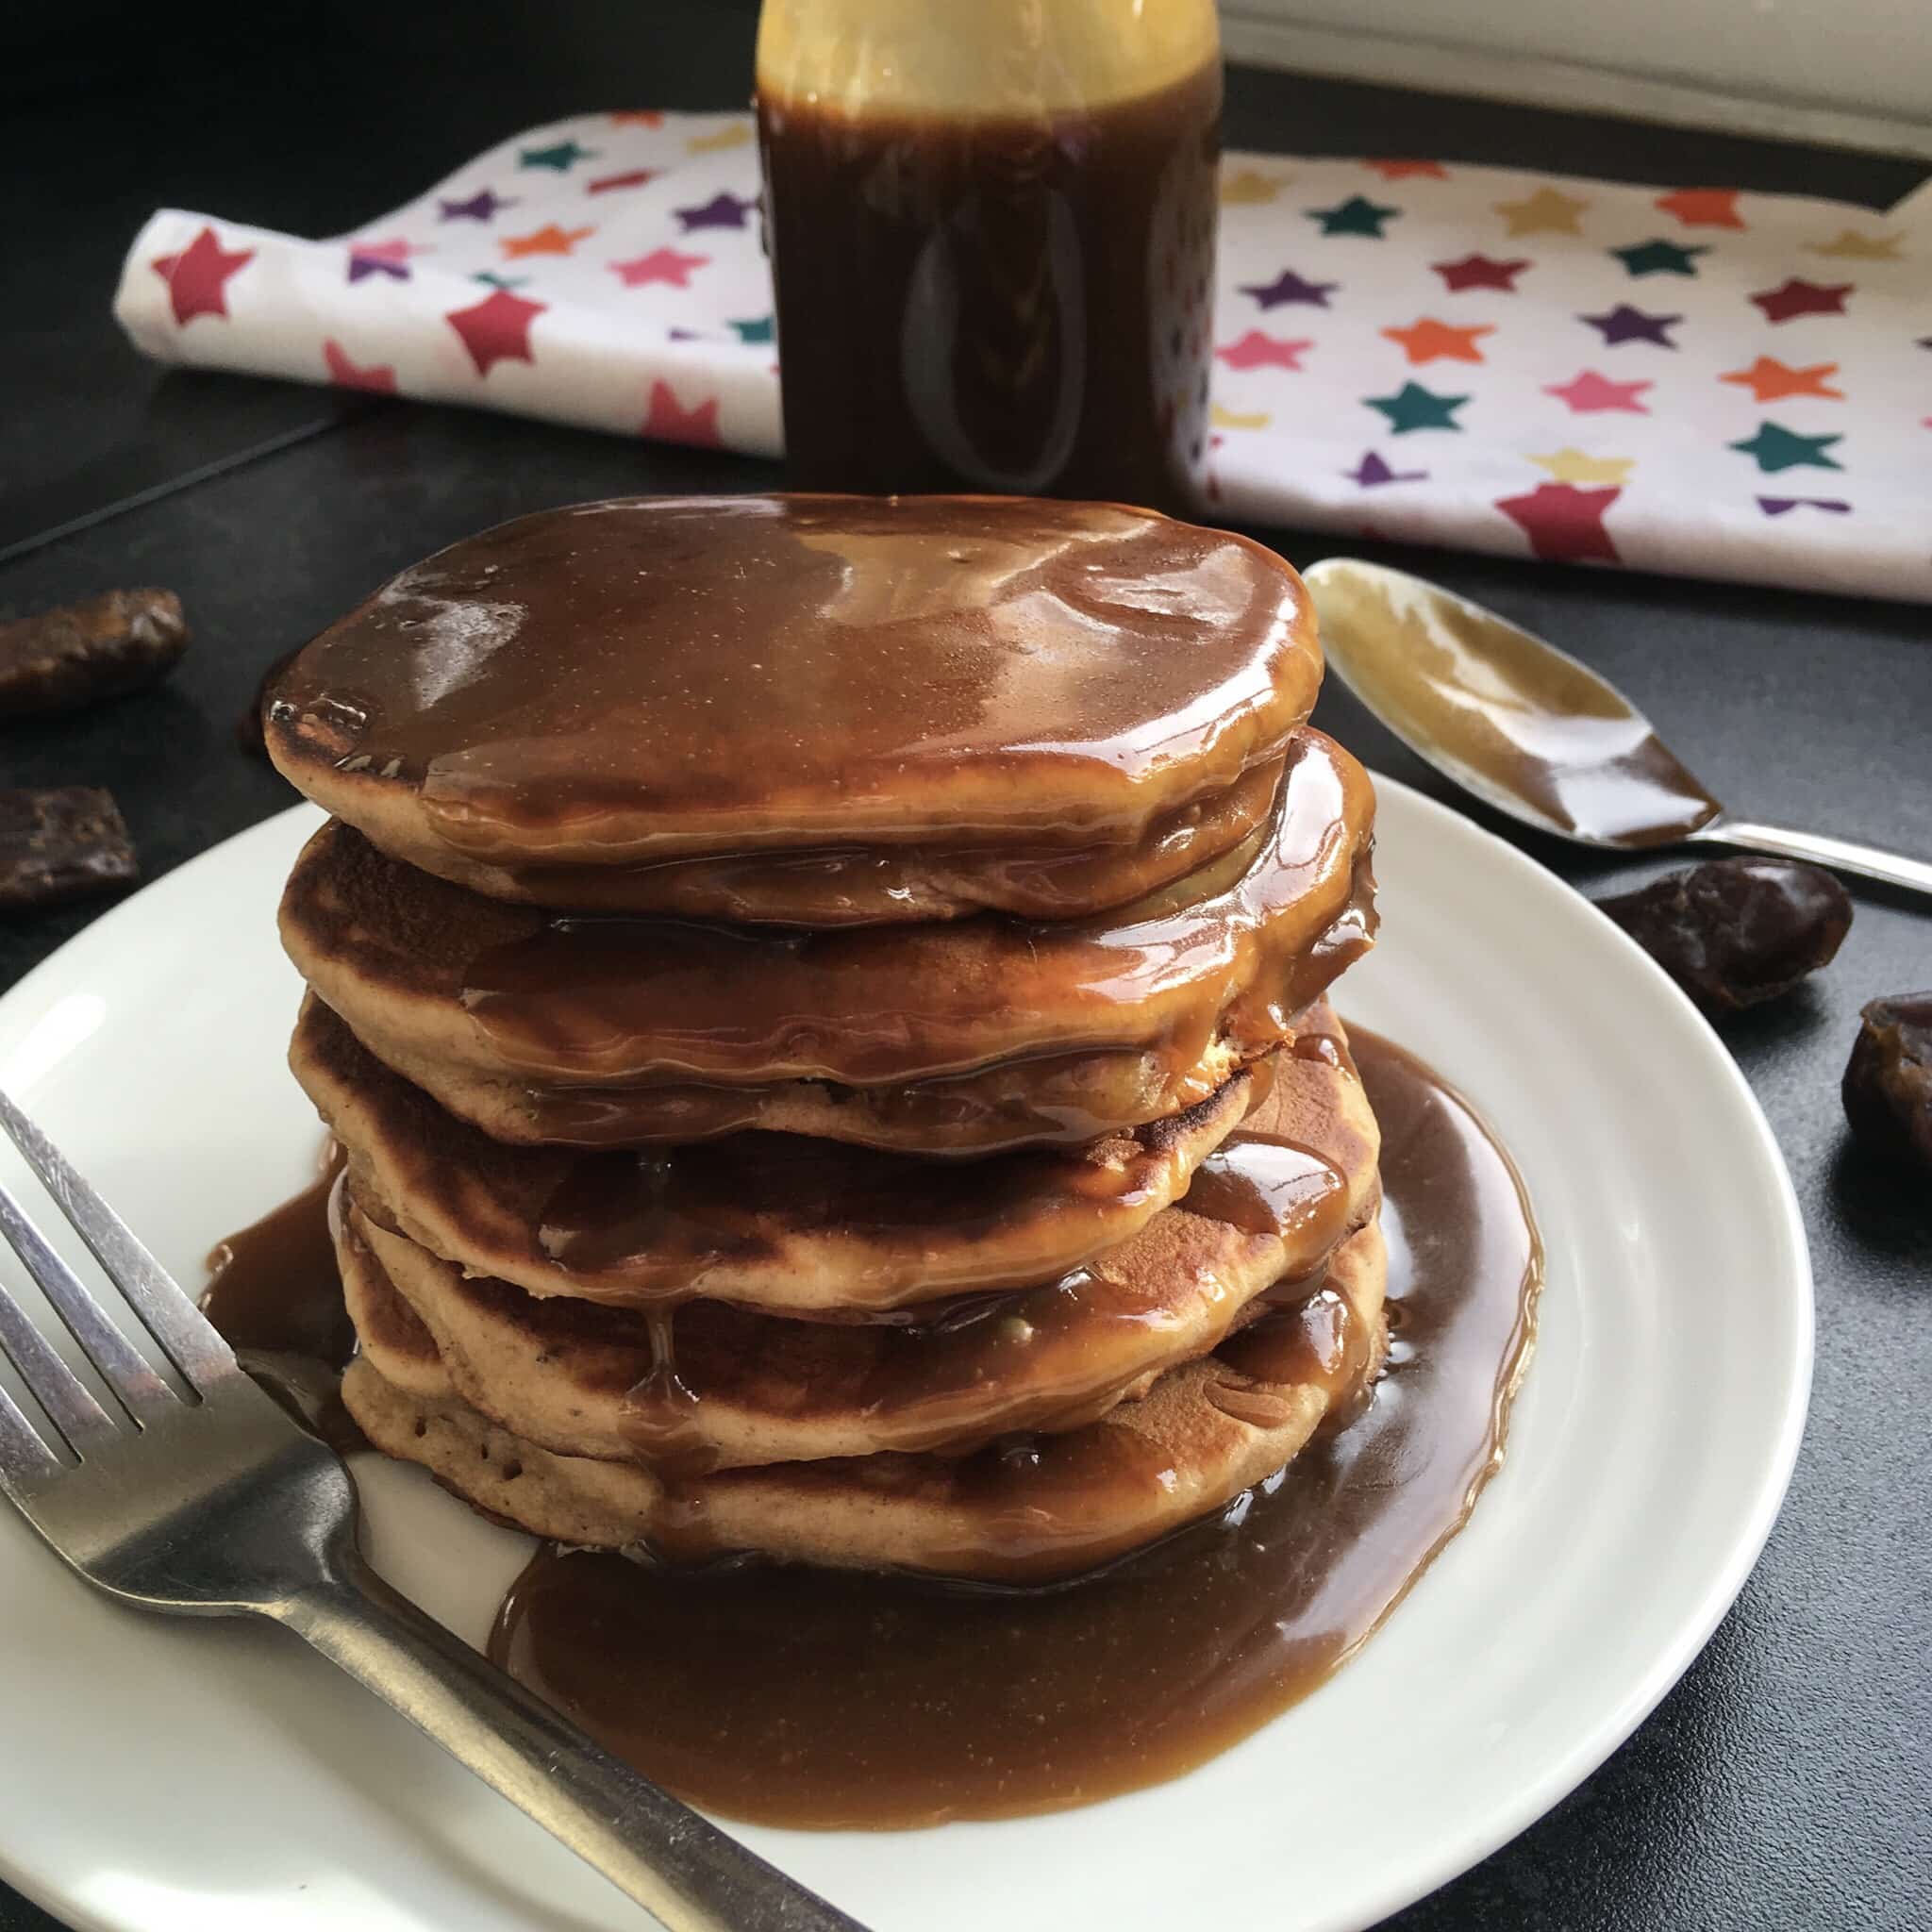 A stack of sticky toffee pudding pancakes smoothered in a rich toffee sauce